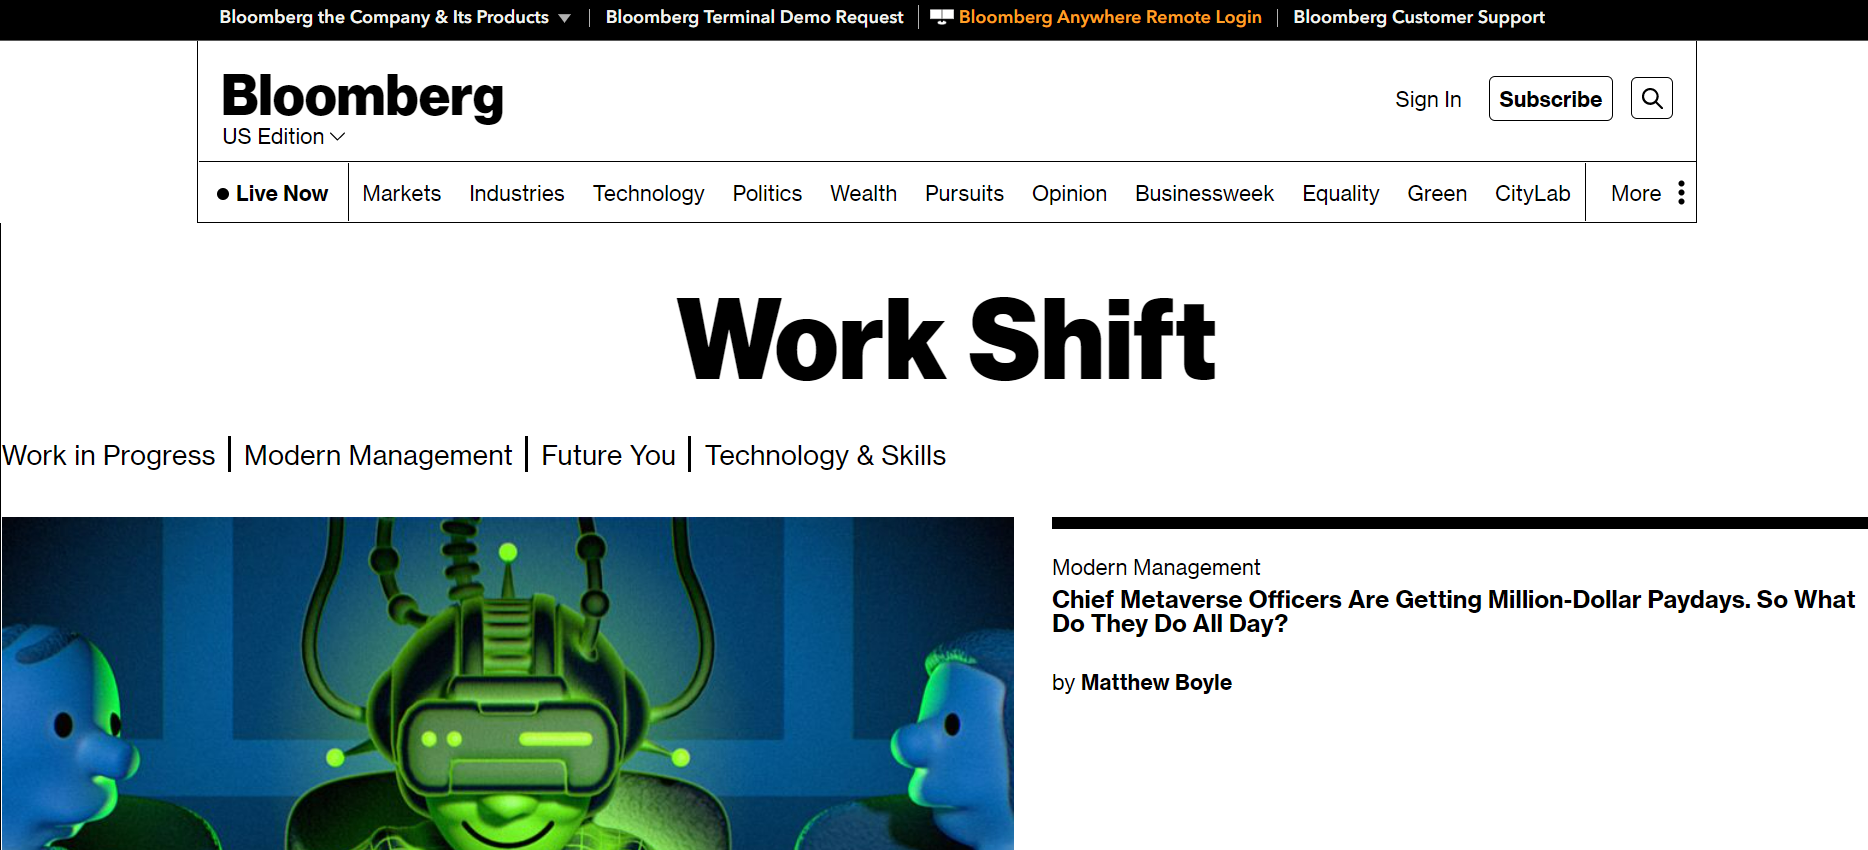 Bloomberg launches site covering work issues